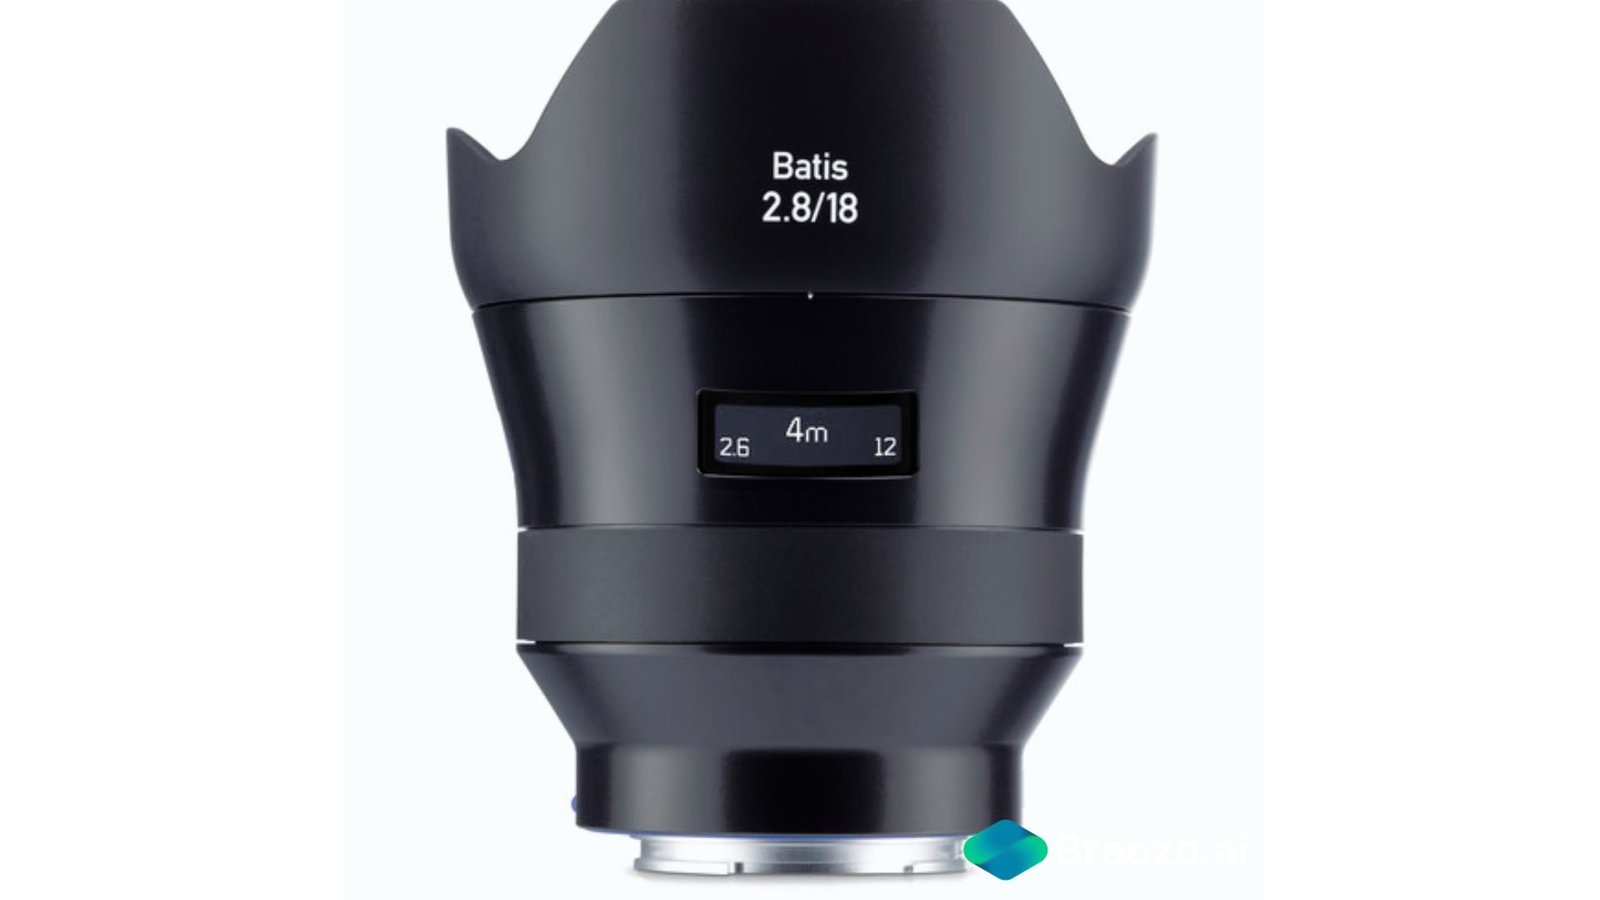 Rent ZEISS Batis Lens for Sony E Mount 2.8/18 in Delhi NCR, Camera, Camera lenses for rent, Camera accessories, in Delhi Gurgaon Noida, hire Shooting equipment, Lighting equipment rental, Film gear rental for Video production, camera rental company in Delhi, film equipment rental company